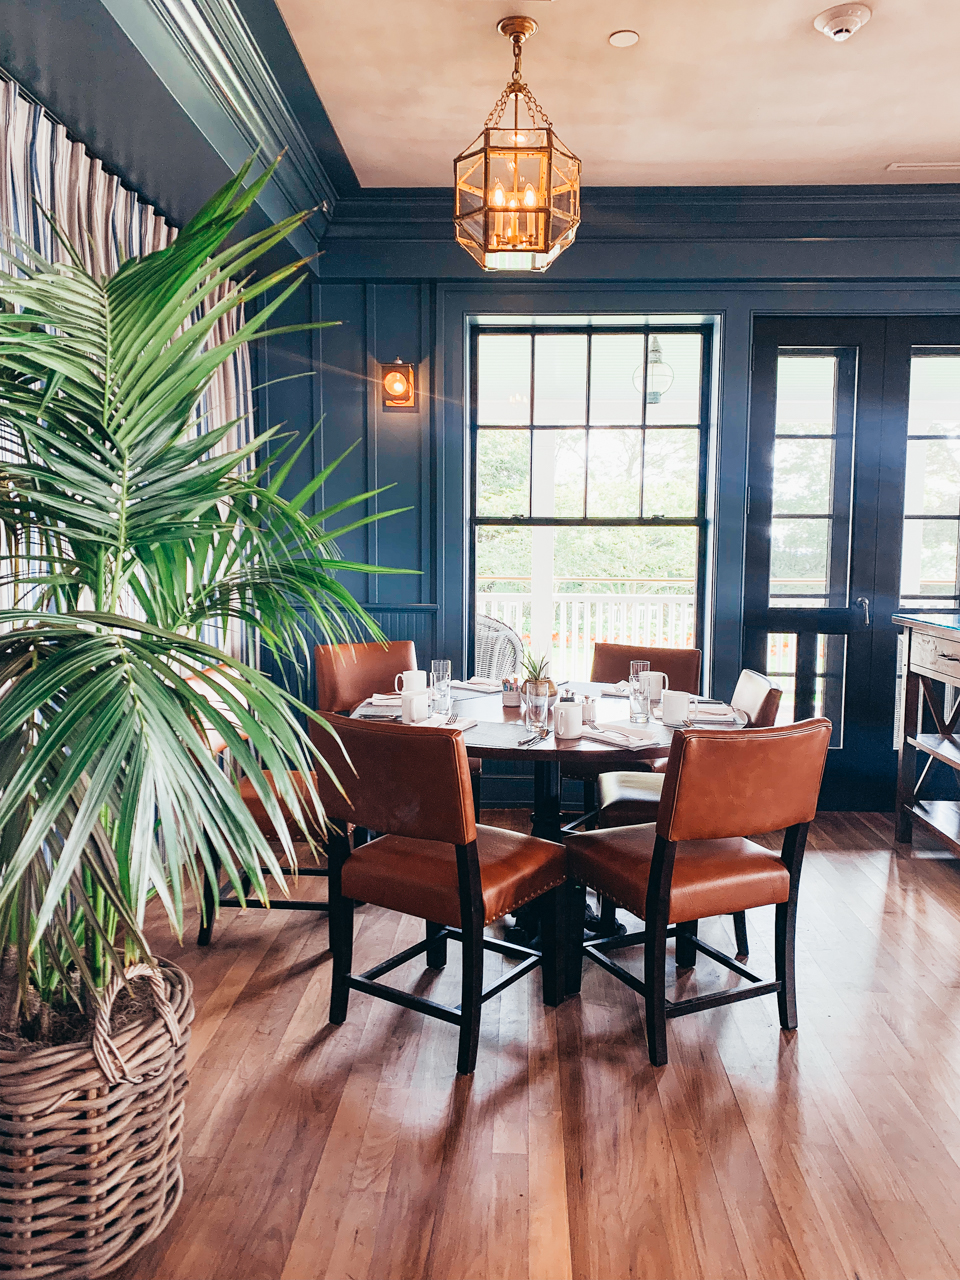 New England Foodie Guide: Top 8 Restaurants in Martha's Vineyard You Must Try by popular New England Food Blogger, Shannon Shipman: image of a restaurant in Martha's Vineyard.